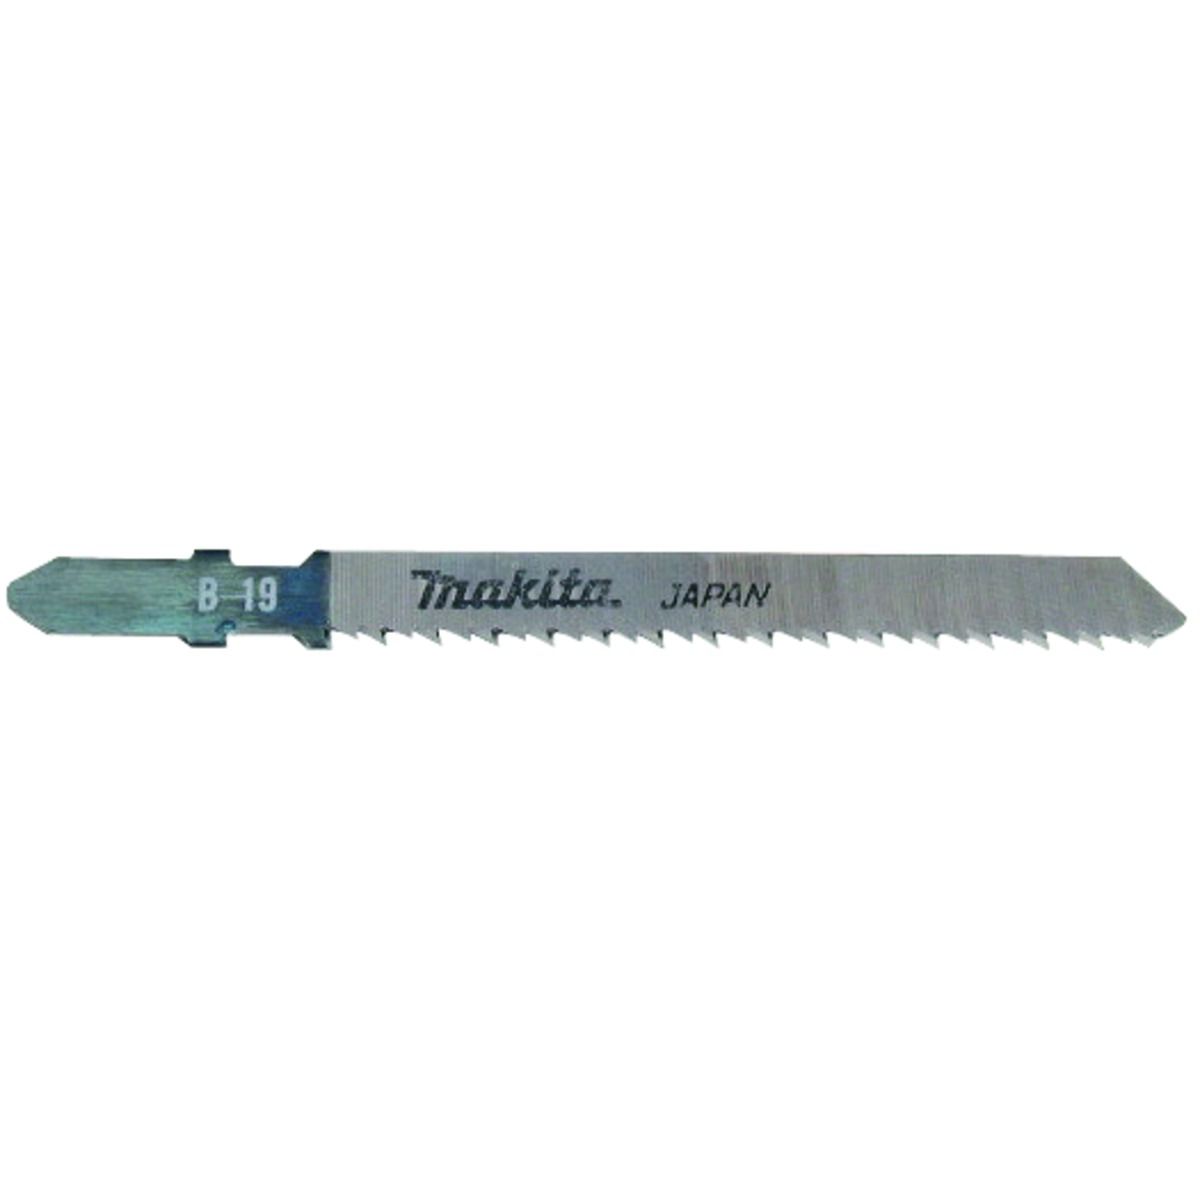 Image of Makita A-85715 Jigsaw Blades for Laminate Wood - Pack of 5